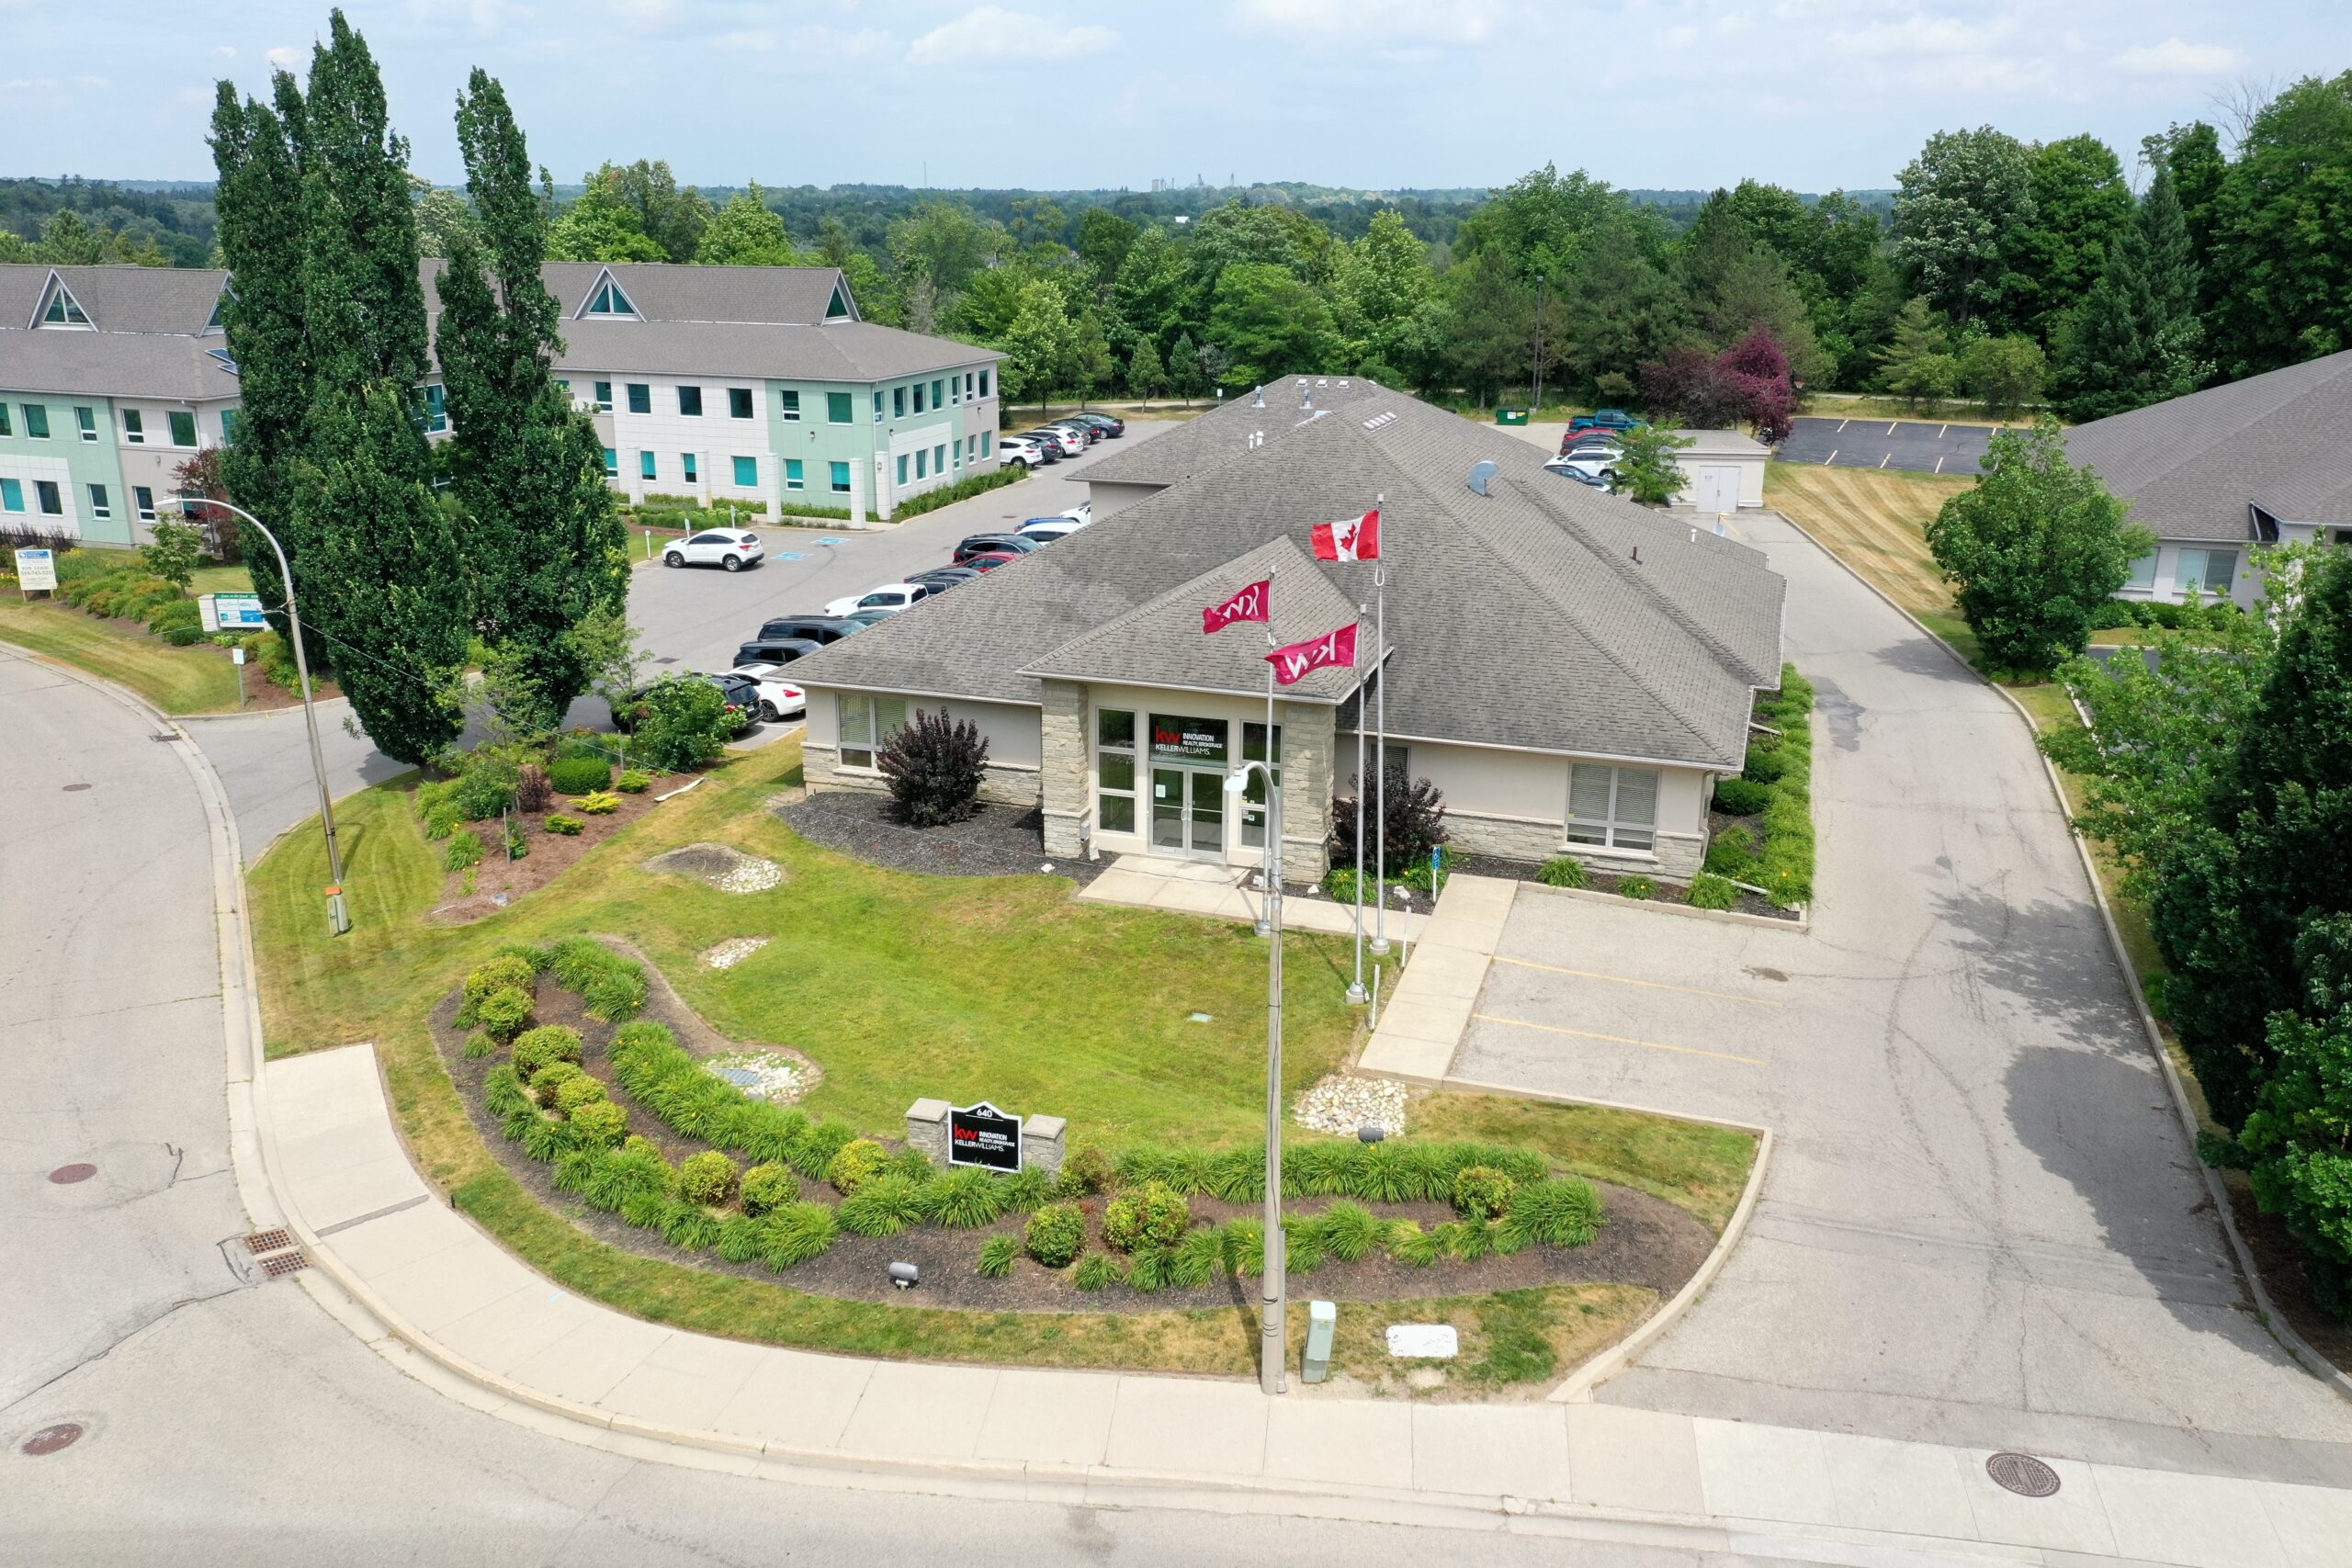 640 Riverbend Drive, Kitchener | Move In Ready Office Building For Sale